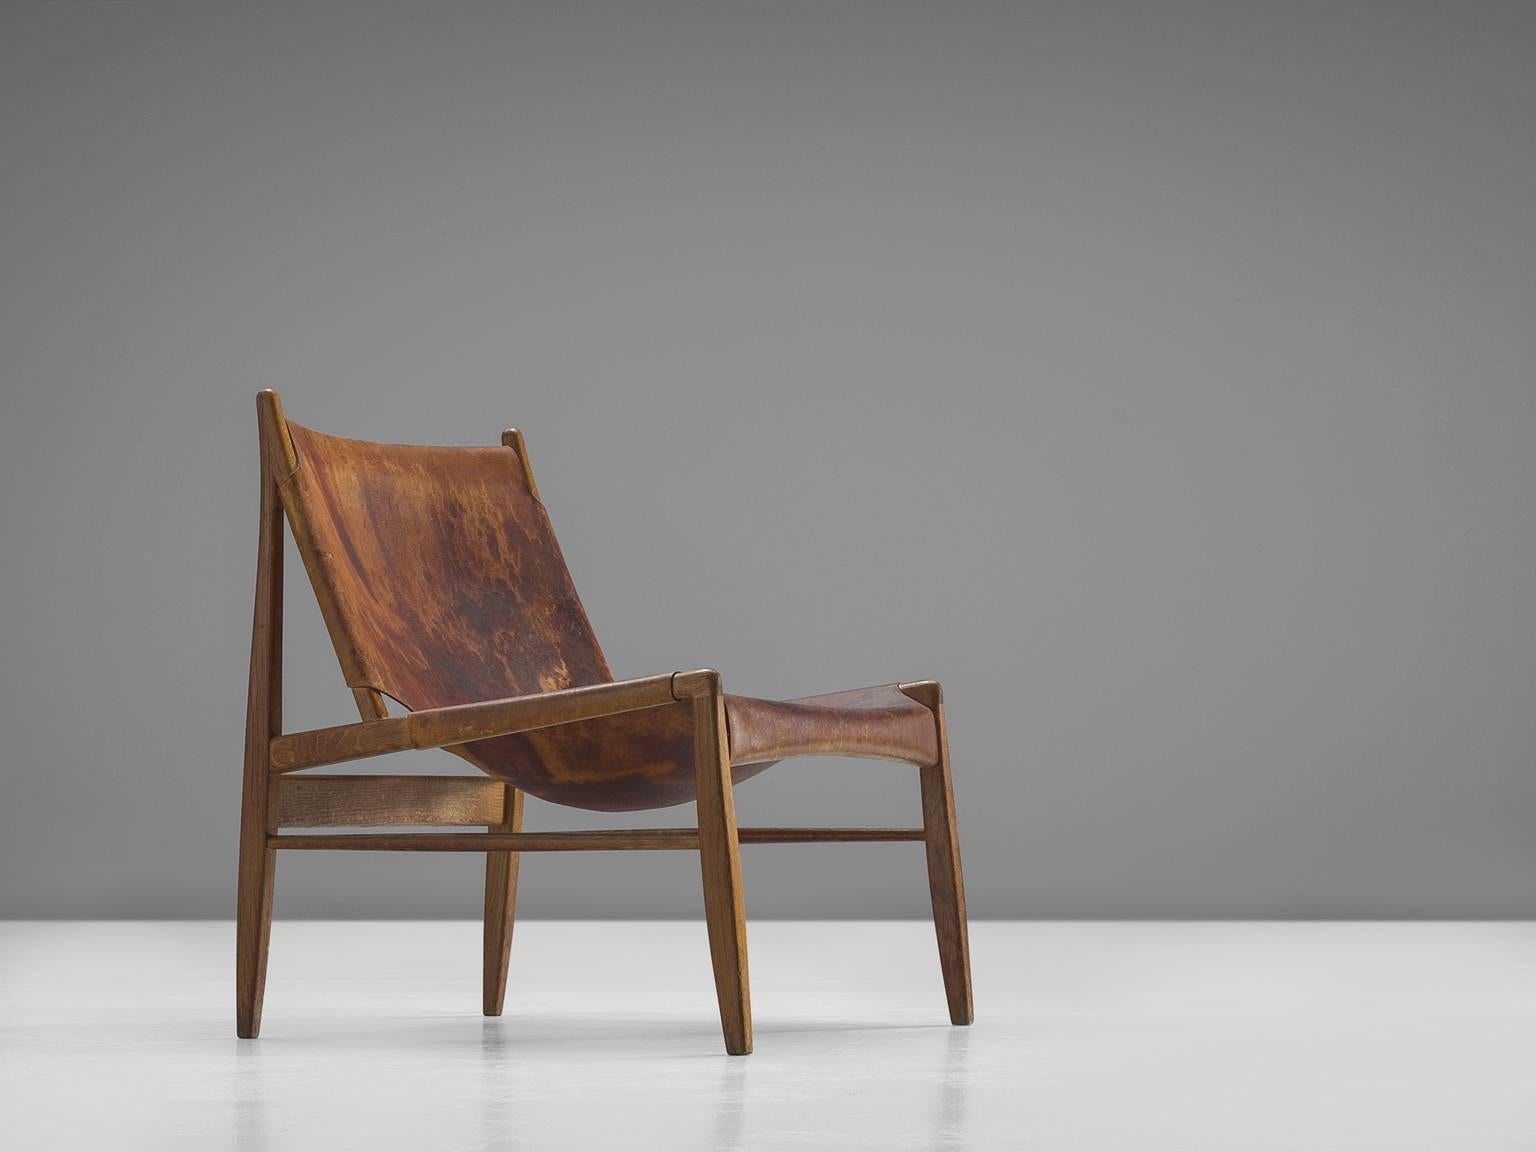 'Chimney' chair, oak and patinated cognac leather by Franz Xaver Lutz for WK Verband, Germany, 1958, Germany. 

This early Chimney chair by Franz Xaver Lutz bears strong resemblances to Spanish and Scandinavian hunting chairs. The design is aptly